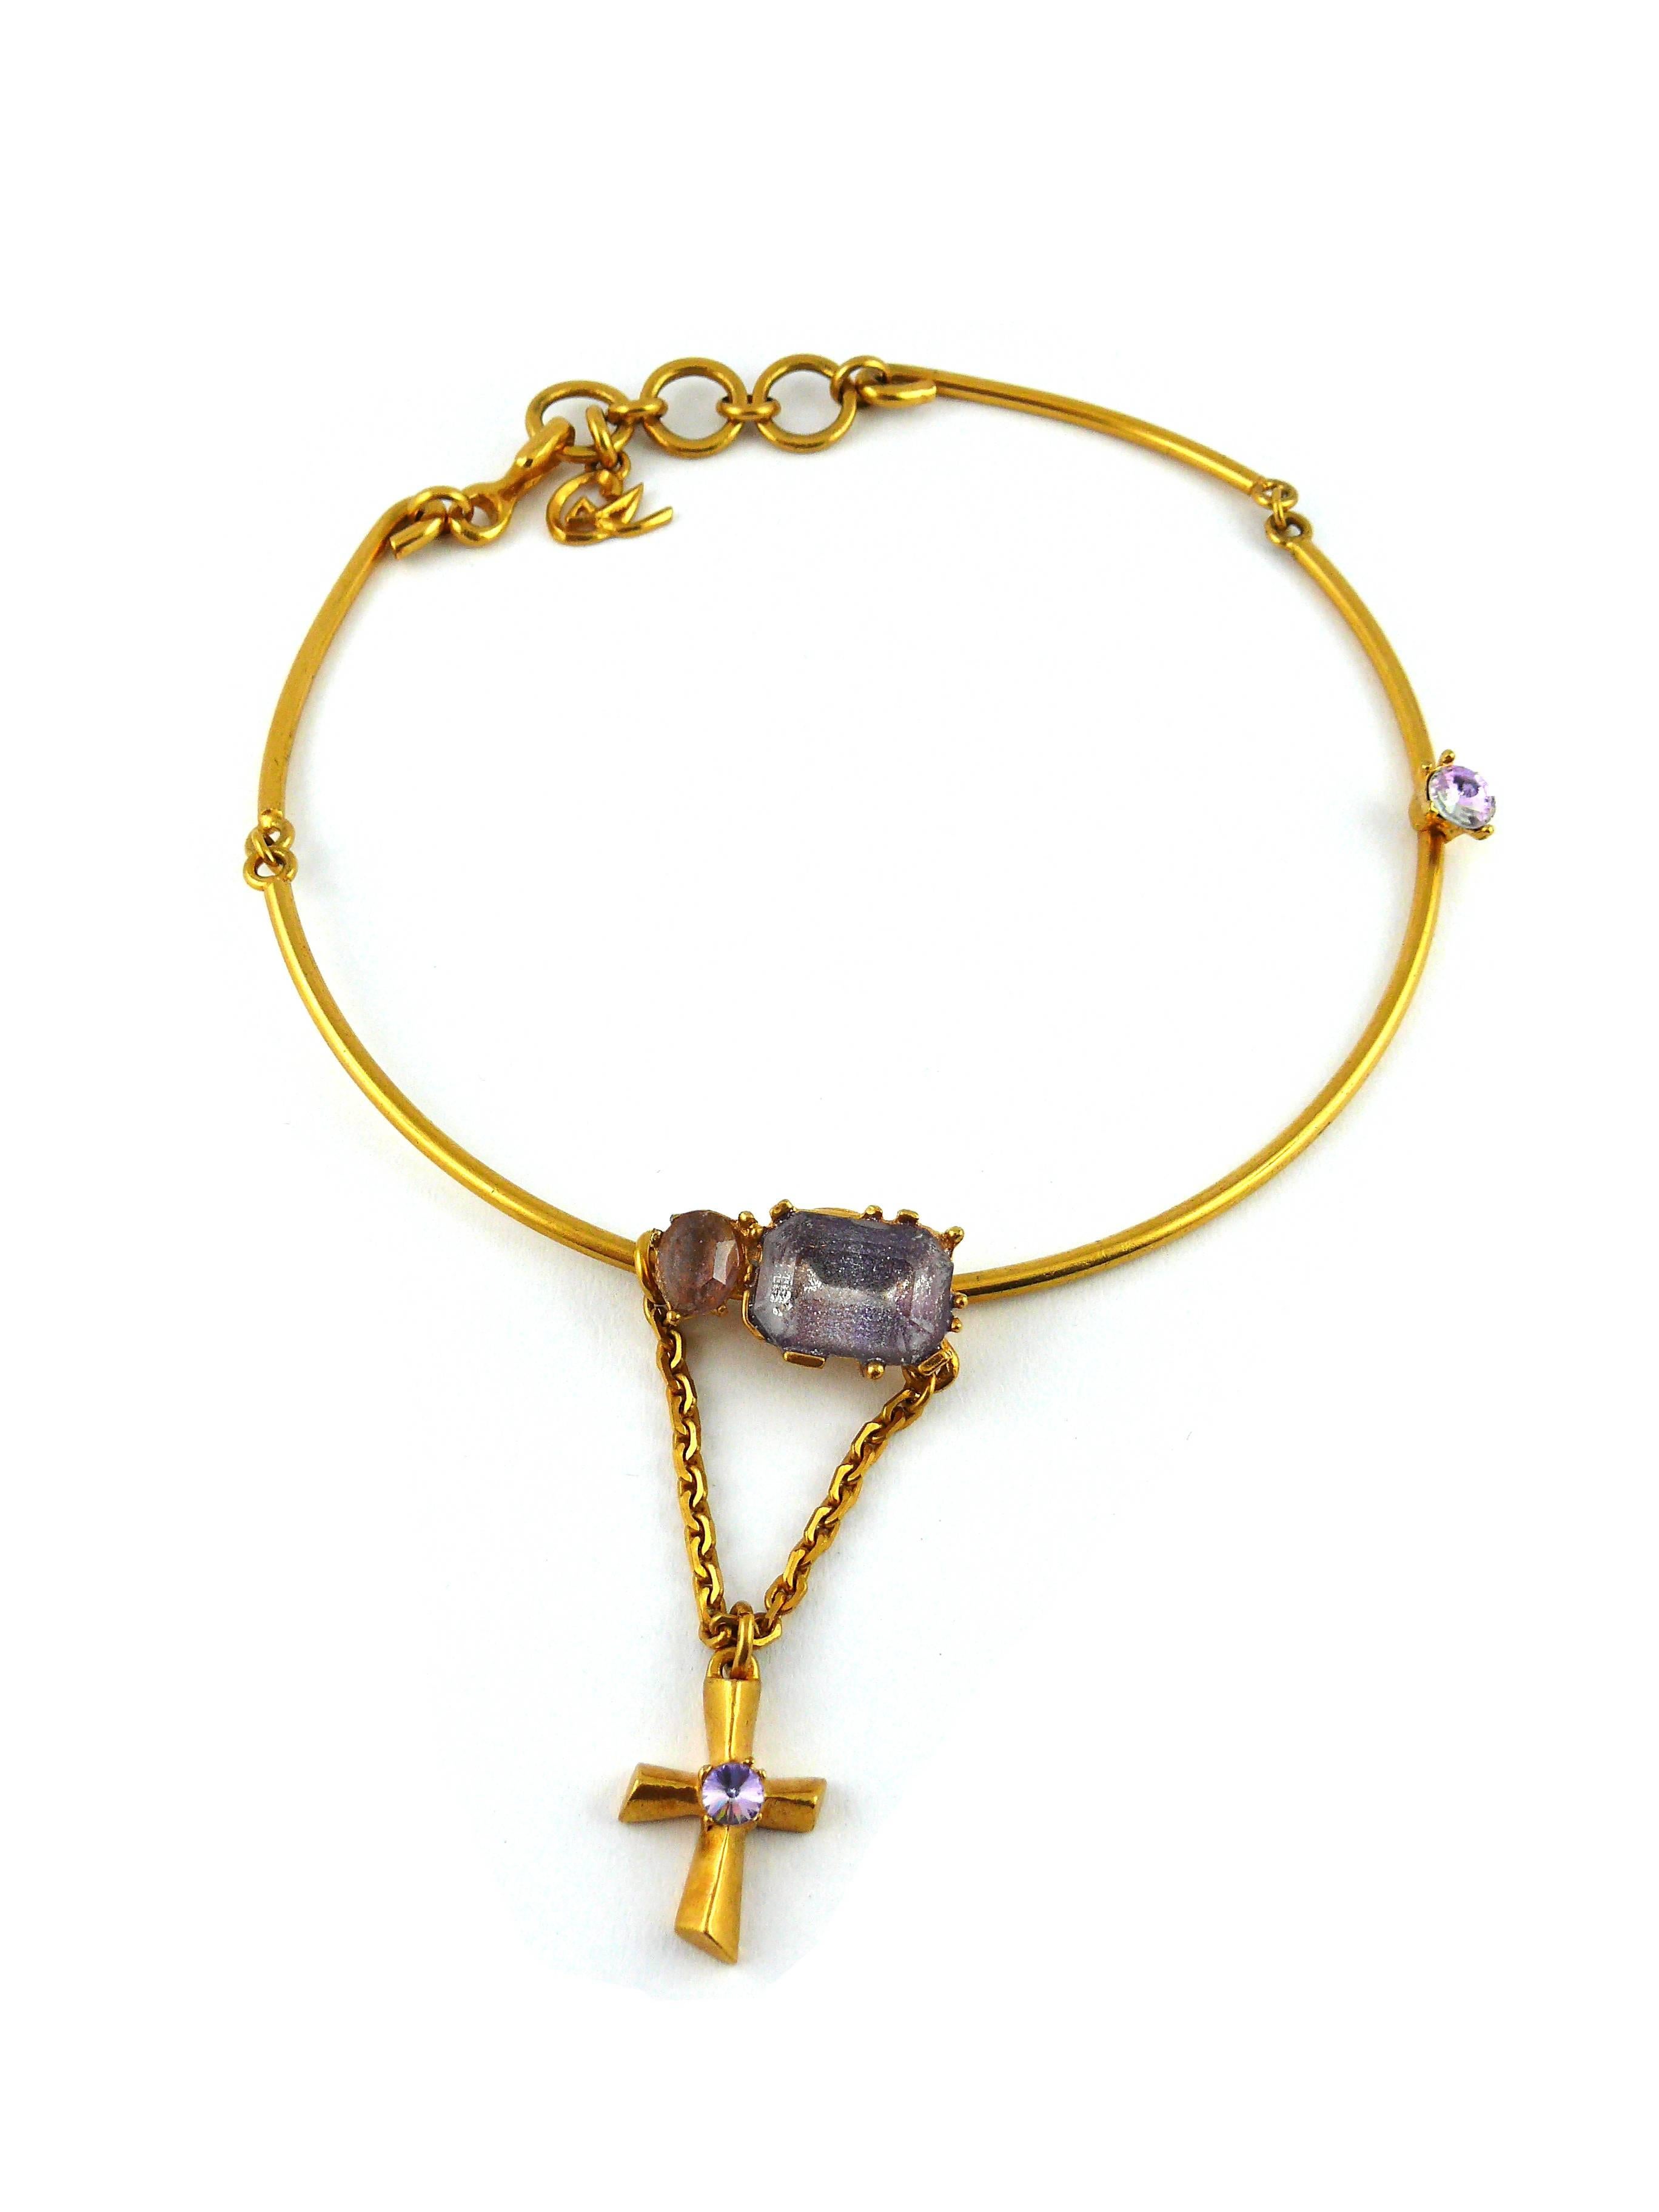 CHRISTIAN LACROIX asymetrical vintage jewelled chocker necklace featuring a cross charm.

Gold tone metal with crystal embellishment.

Marked Christian Lacroix CL Made in France.

Indicative measurements : maximum circumference approx. 38 cm